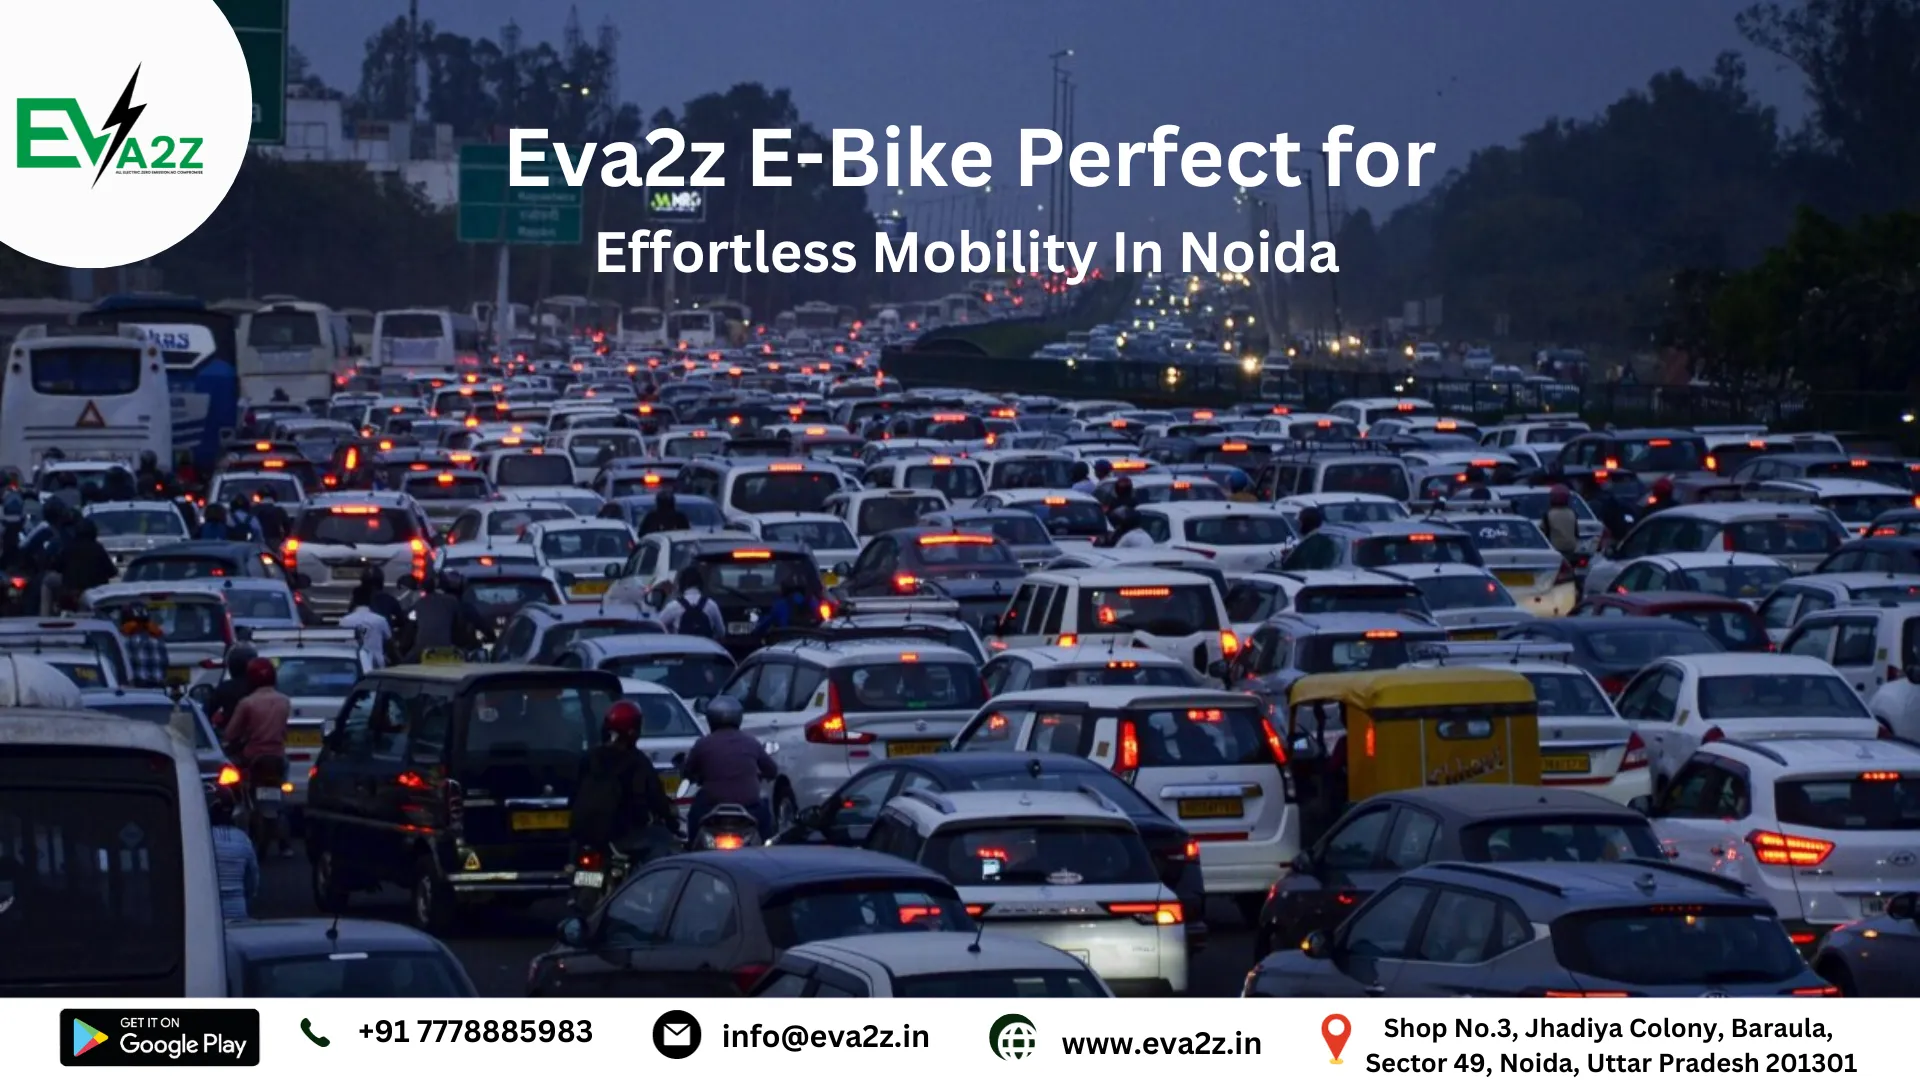 Why An EVA2Z E-Bike Perfect For Effortless Mobility in Noida